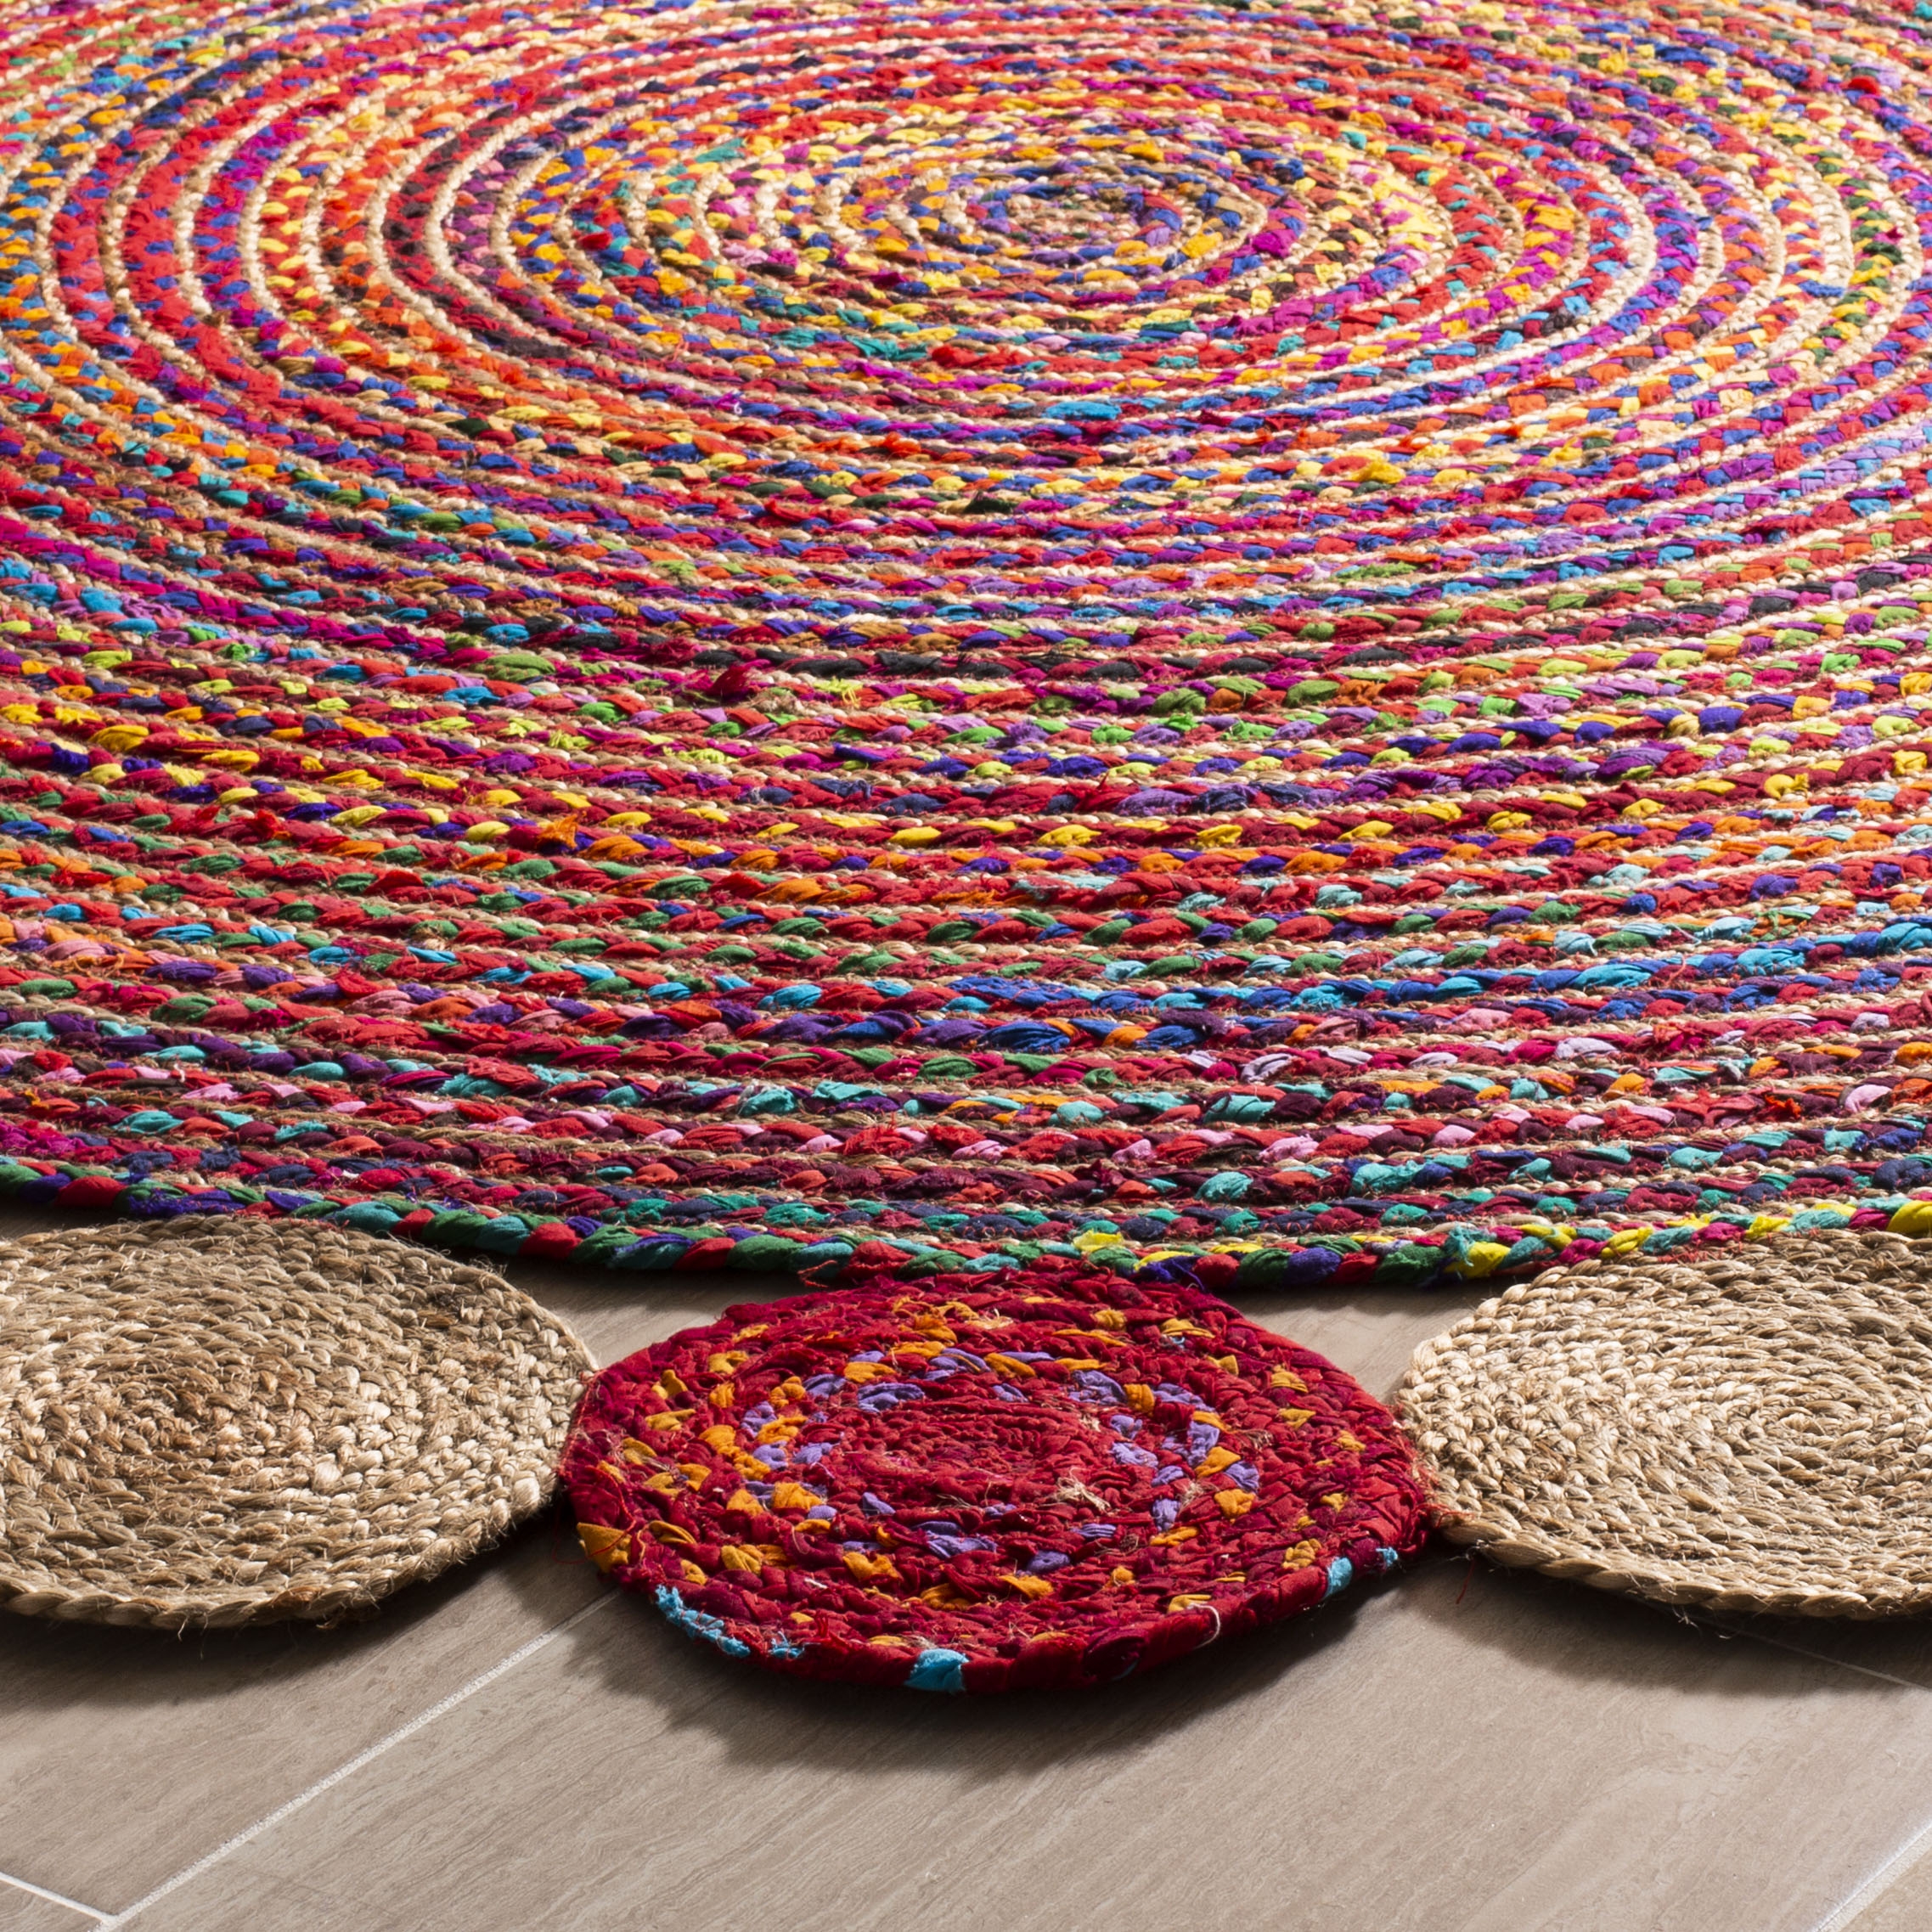 Arlo Home Hand Woven Area Rug, CAP201A, Red/Multi,  8' X 8' Round - Image 2